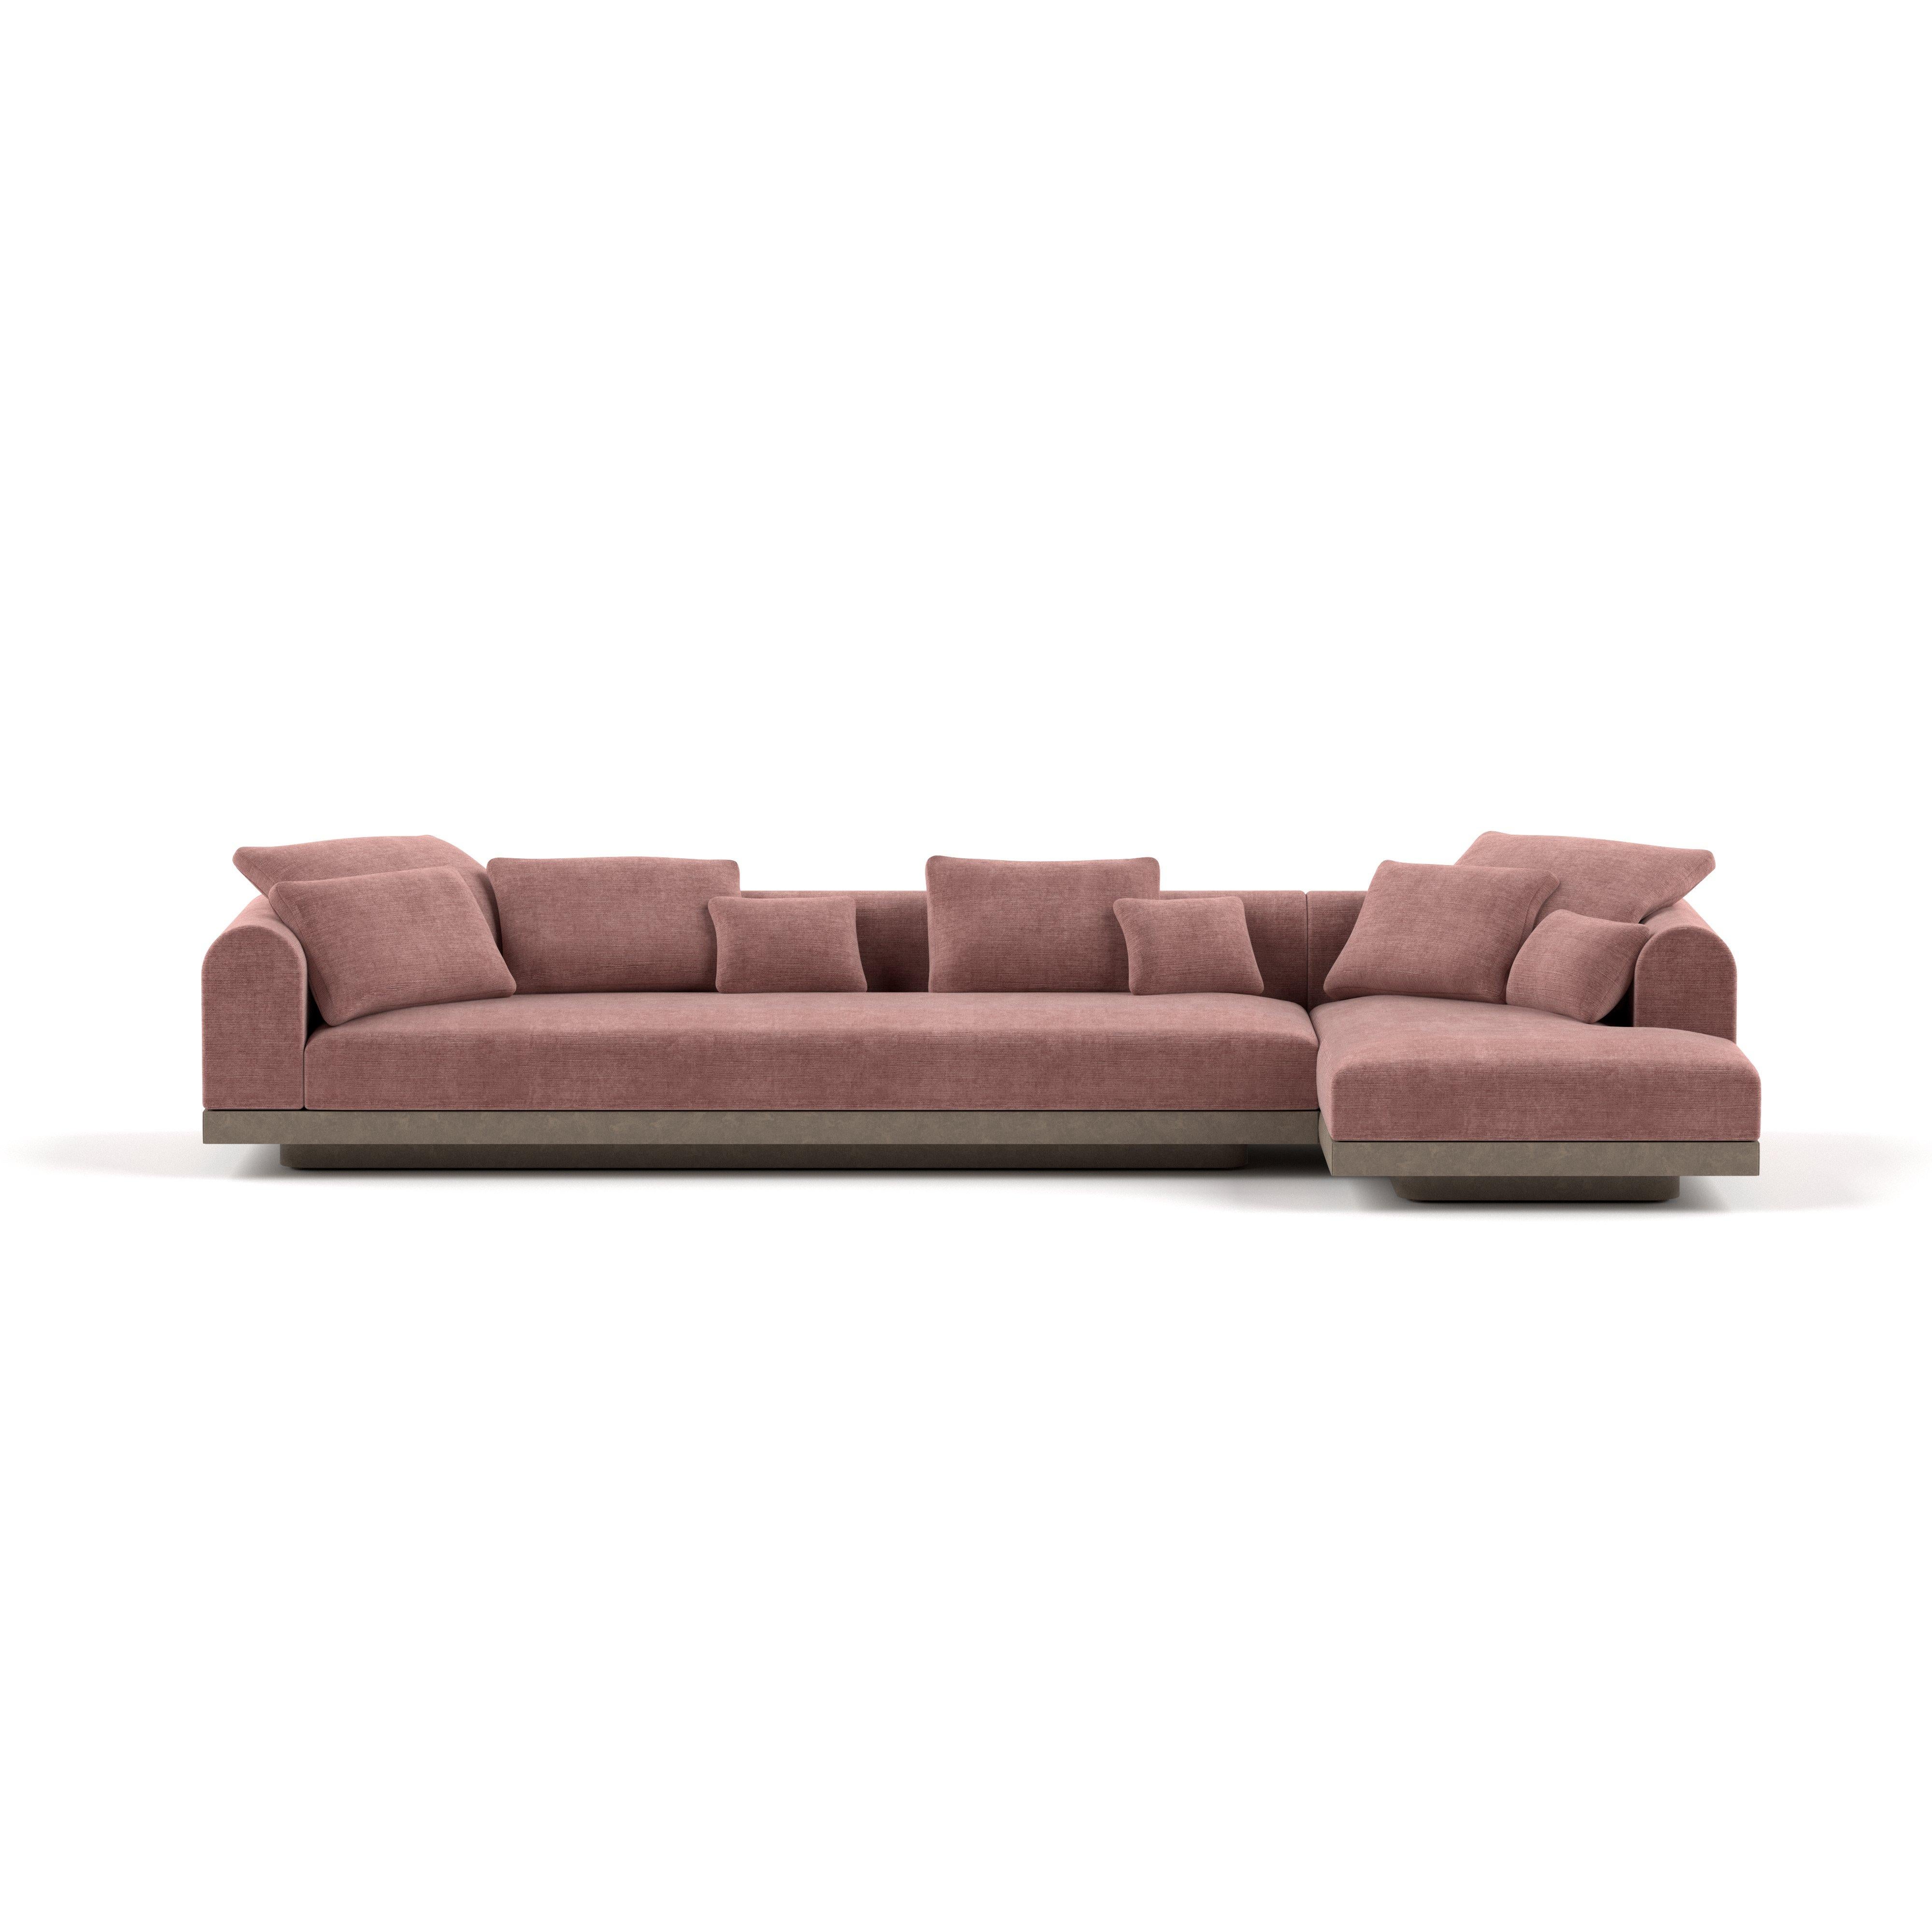 'Aqueduct' Contemporary Sofa by Poiat, Setup 2, Yang 95, High Plinth For Sale 5